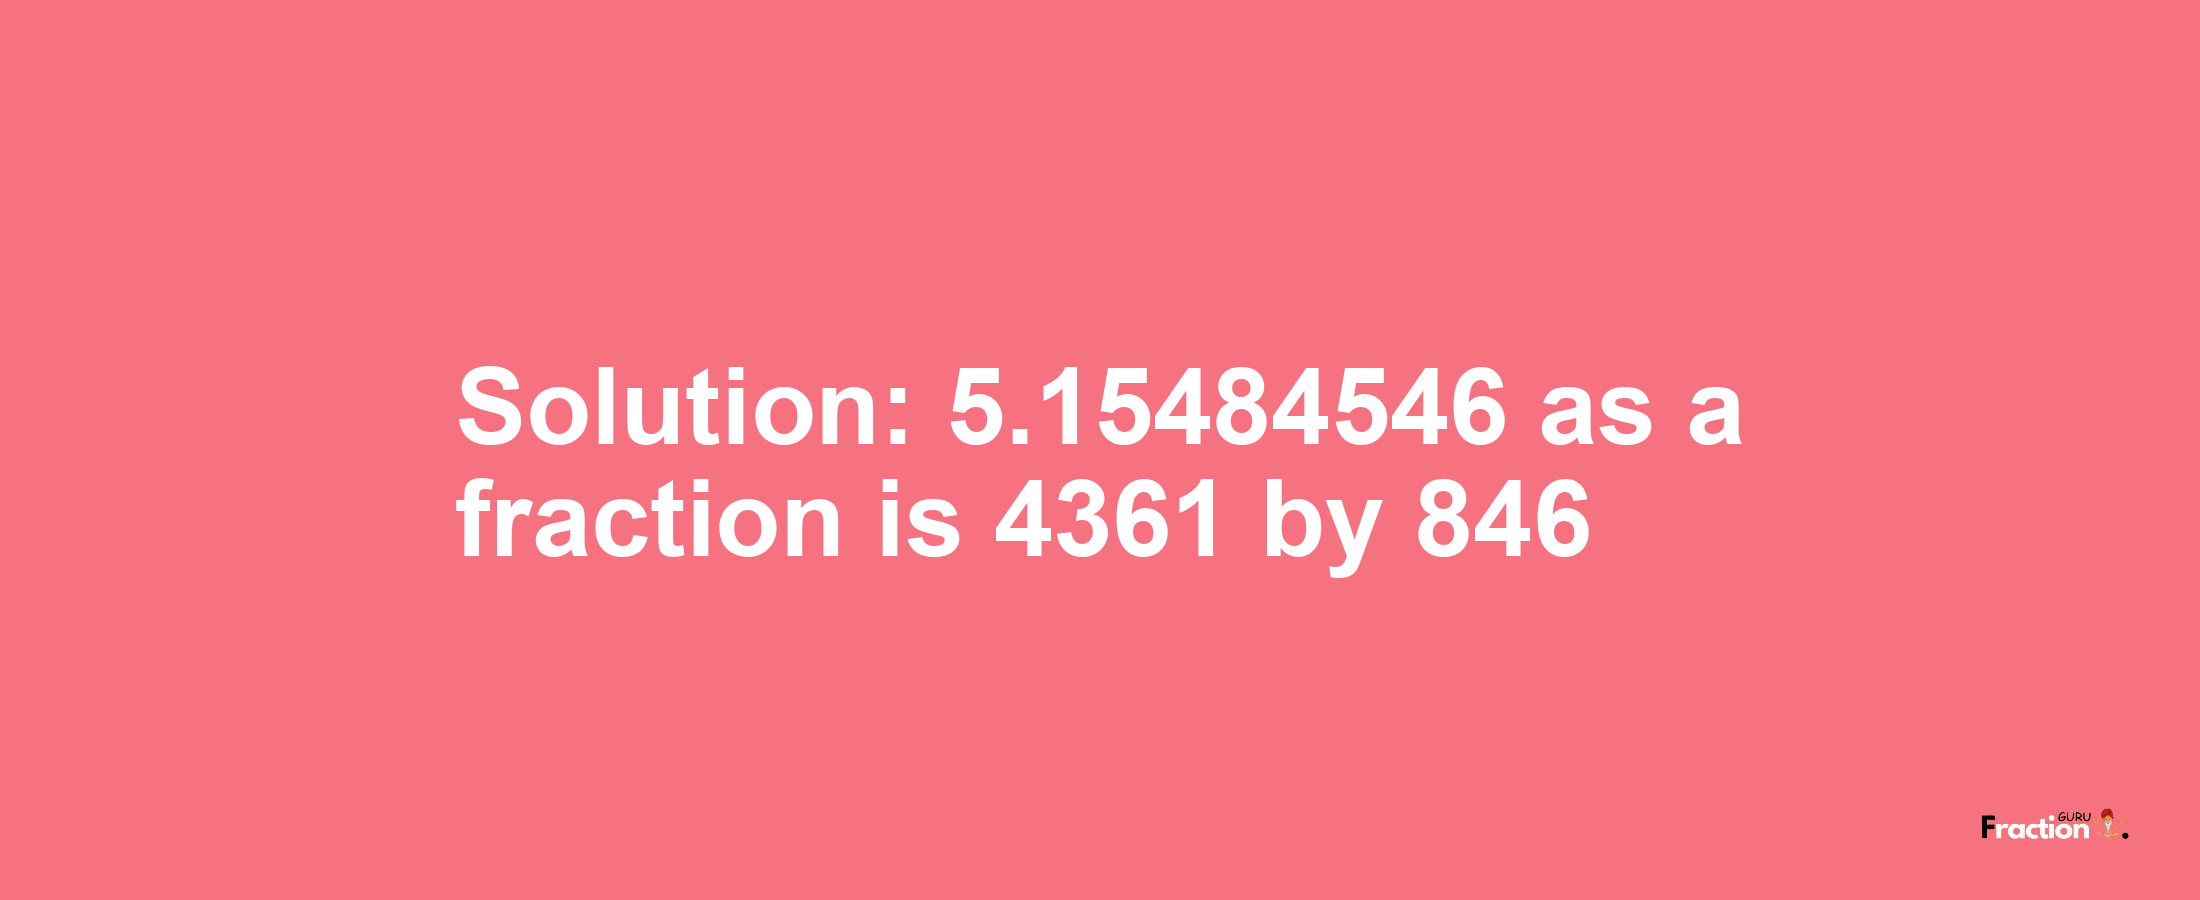 Solution:5.15484546 as a fraction is 4361/846